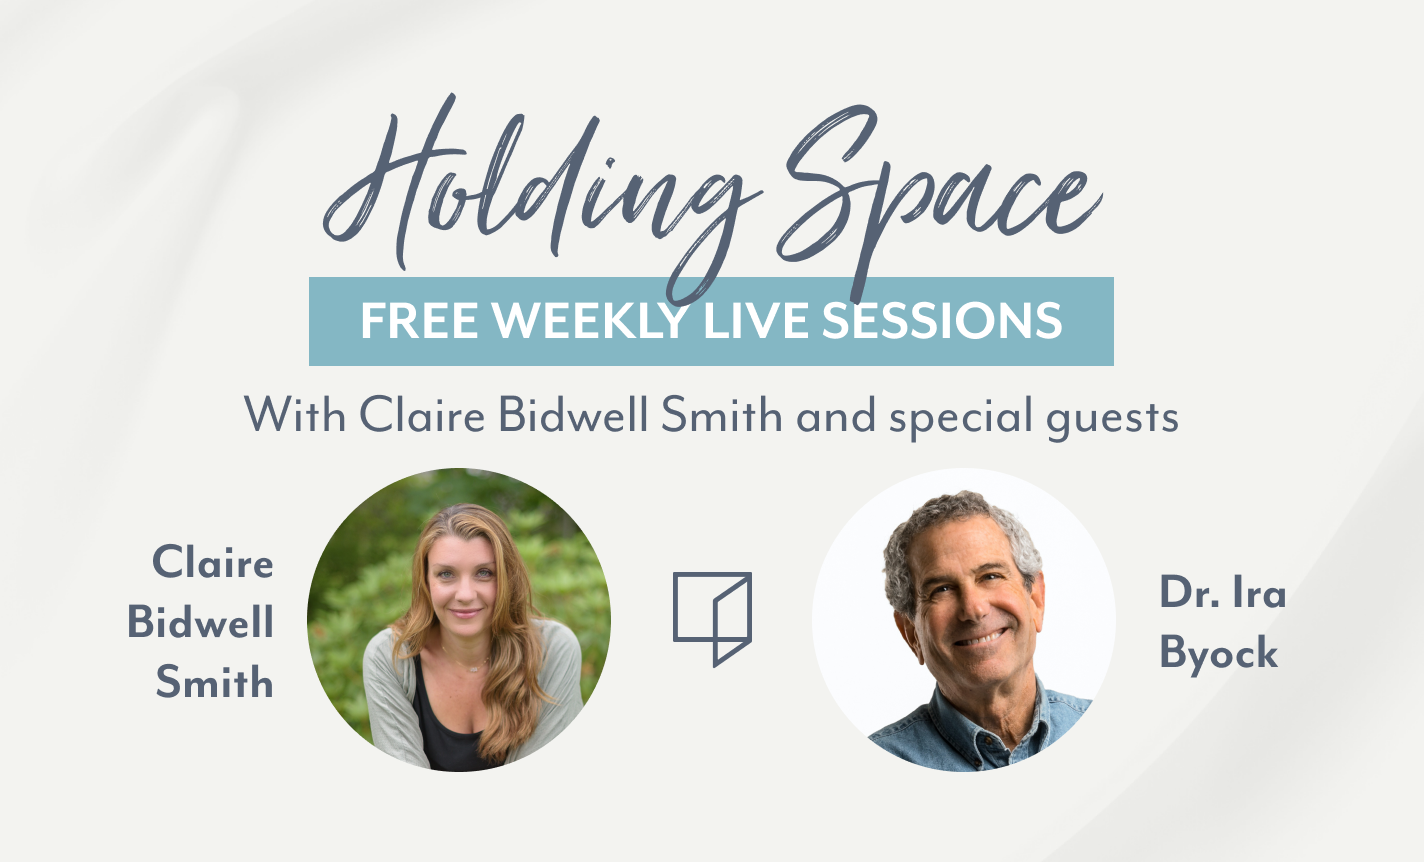 Holding Steady with Claire Bidwell Smith and Dr. Ira Byock